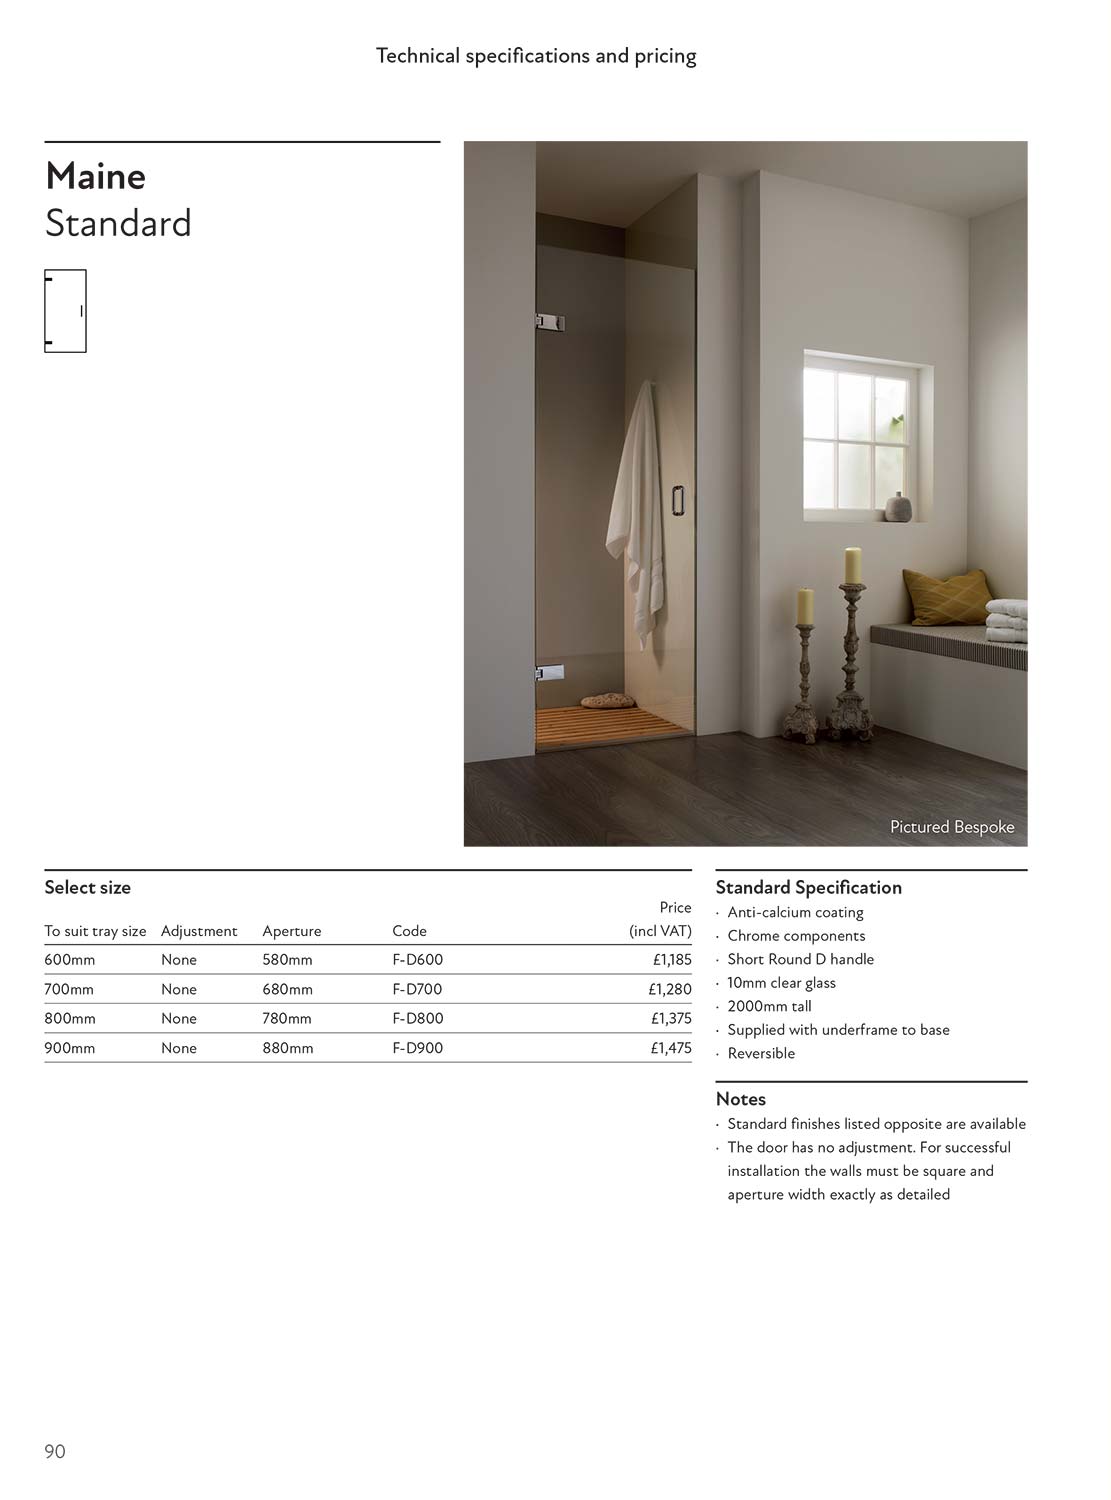 Maine Standard specification